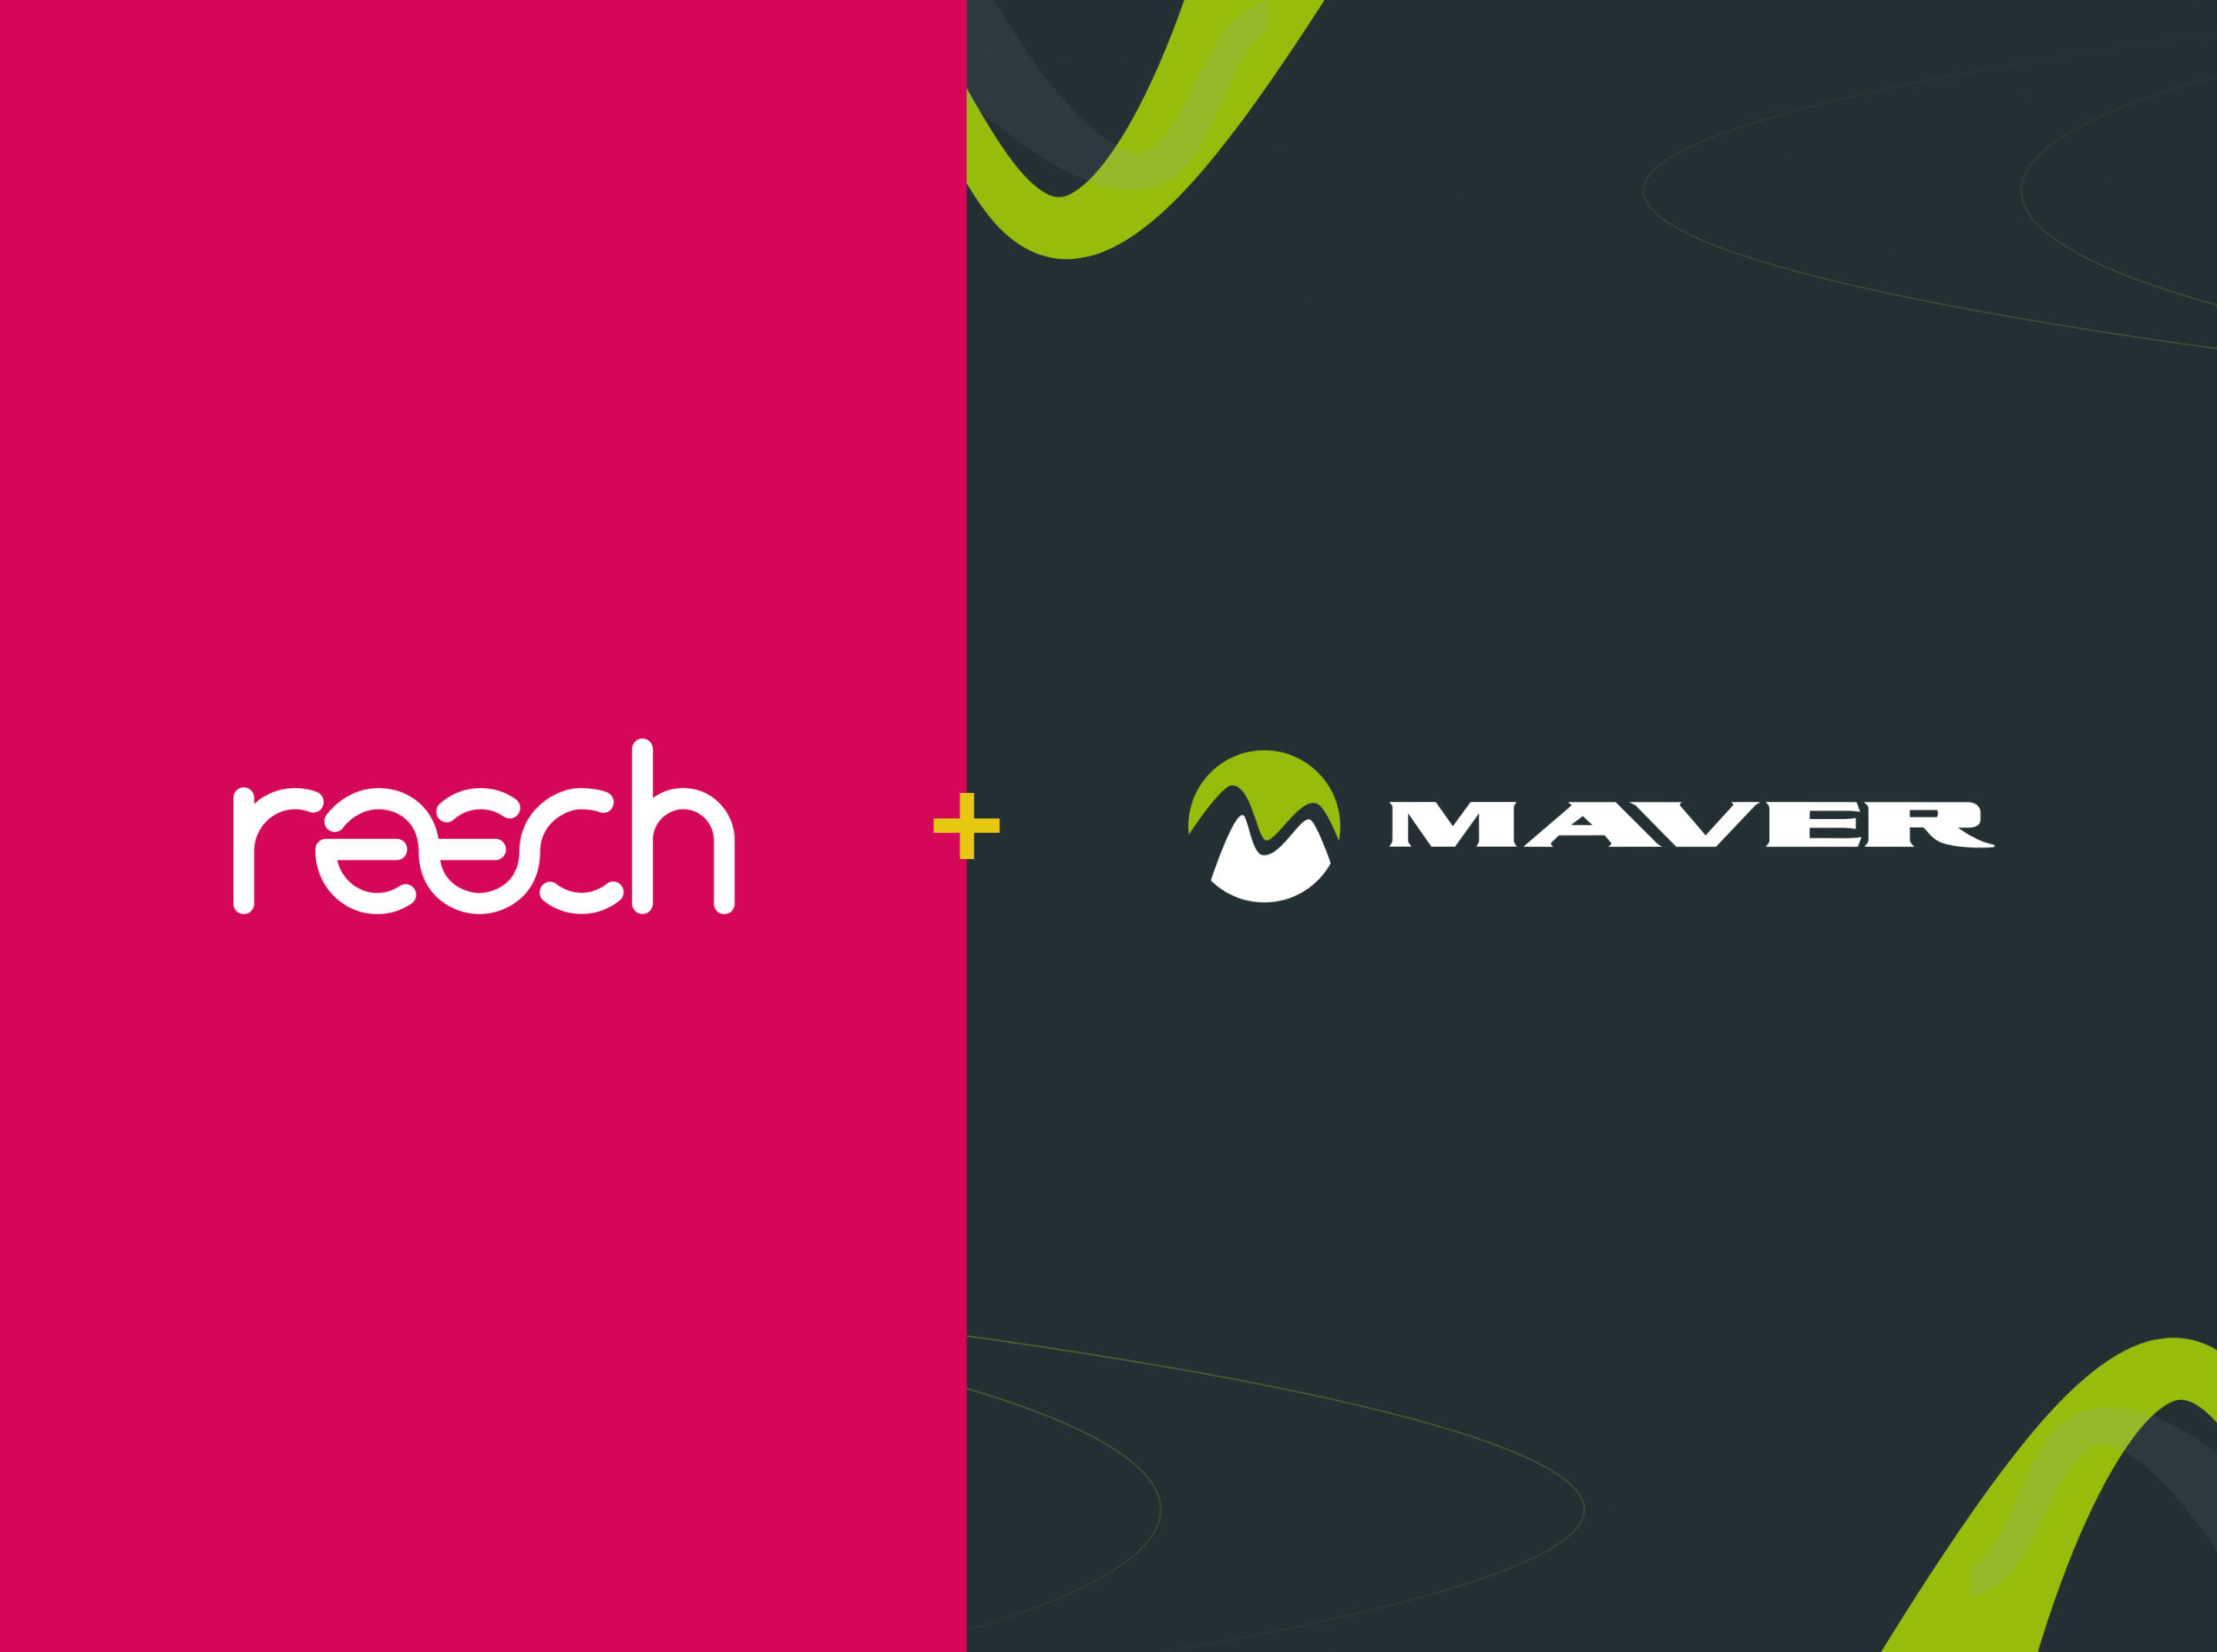 Our exciting partnership with Maver UK